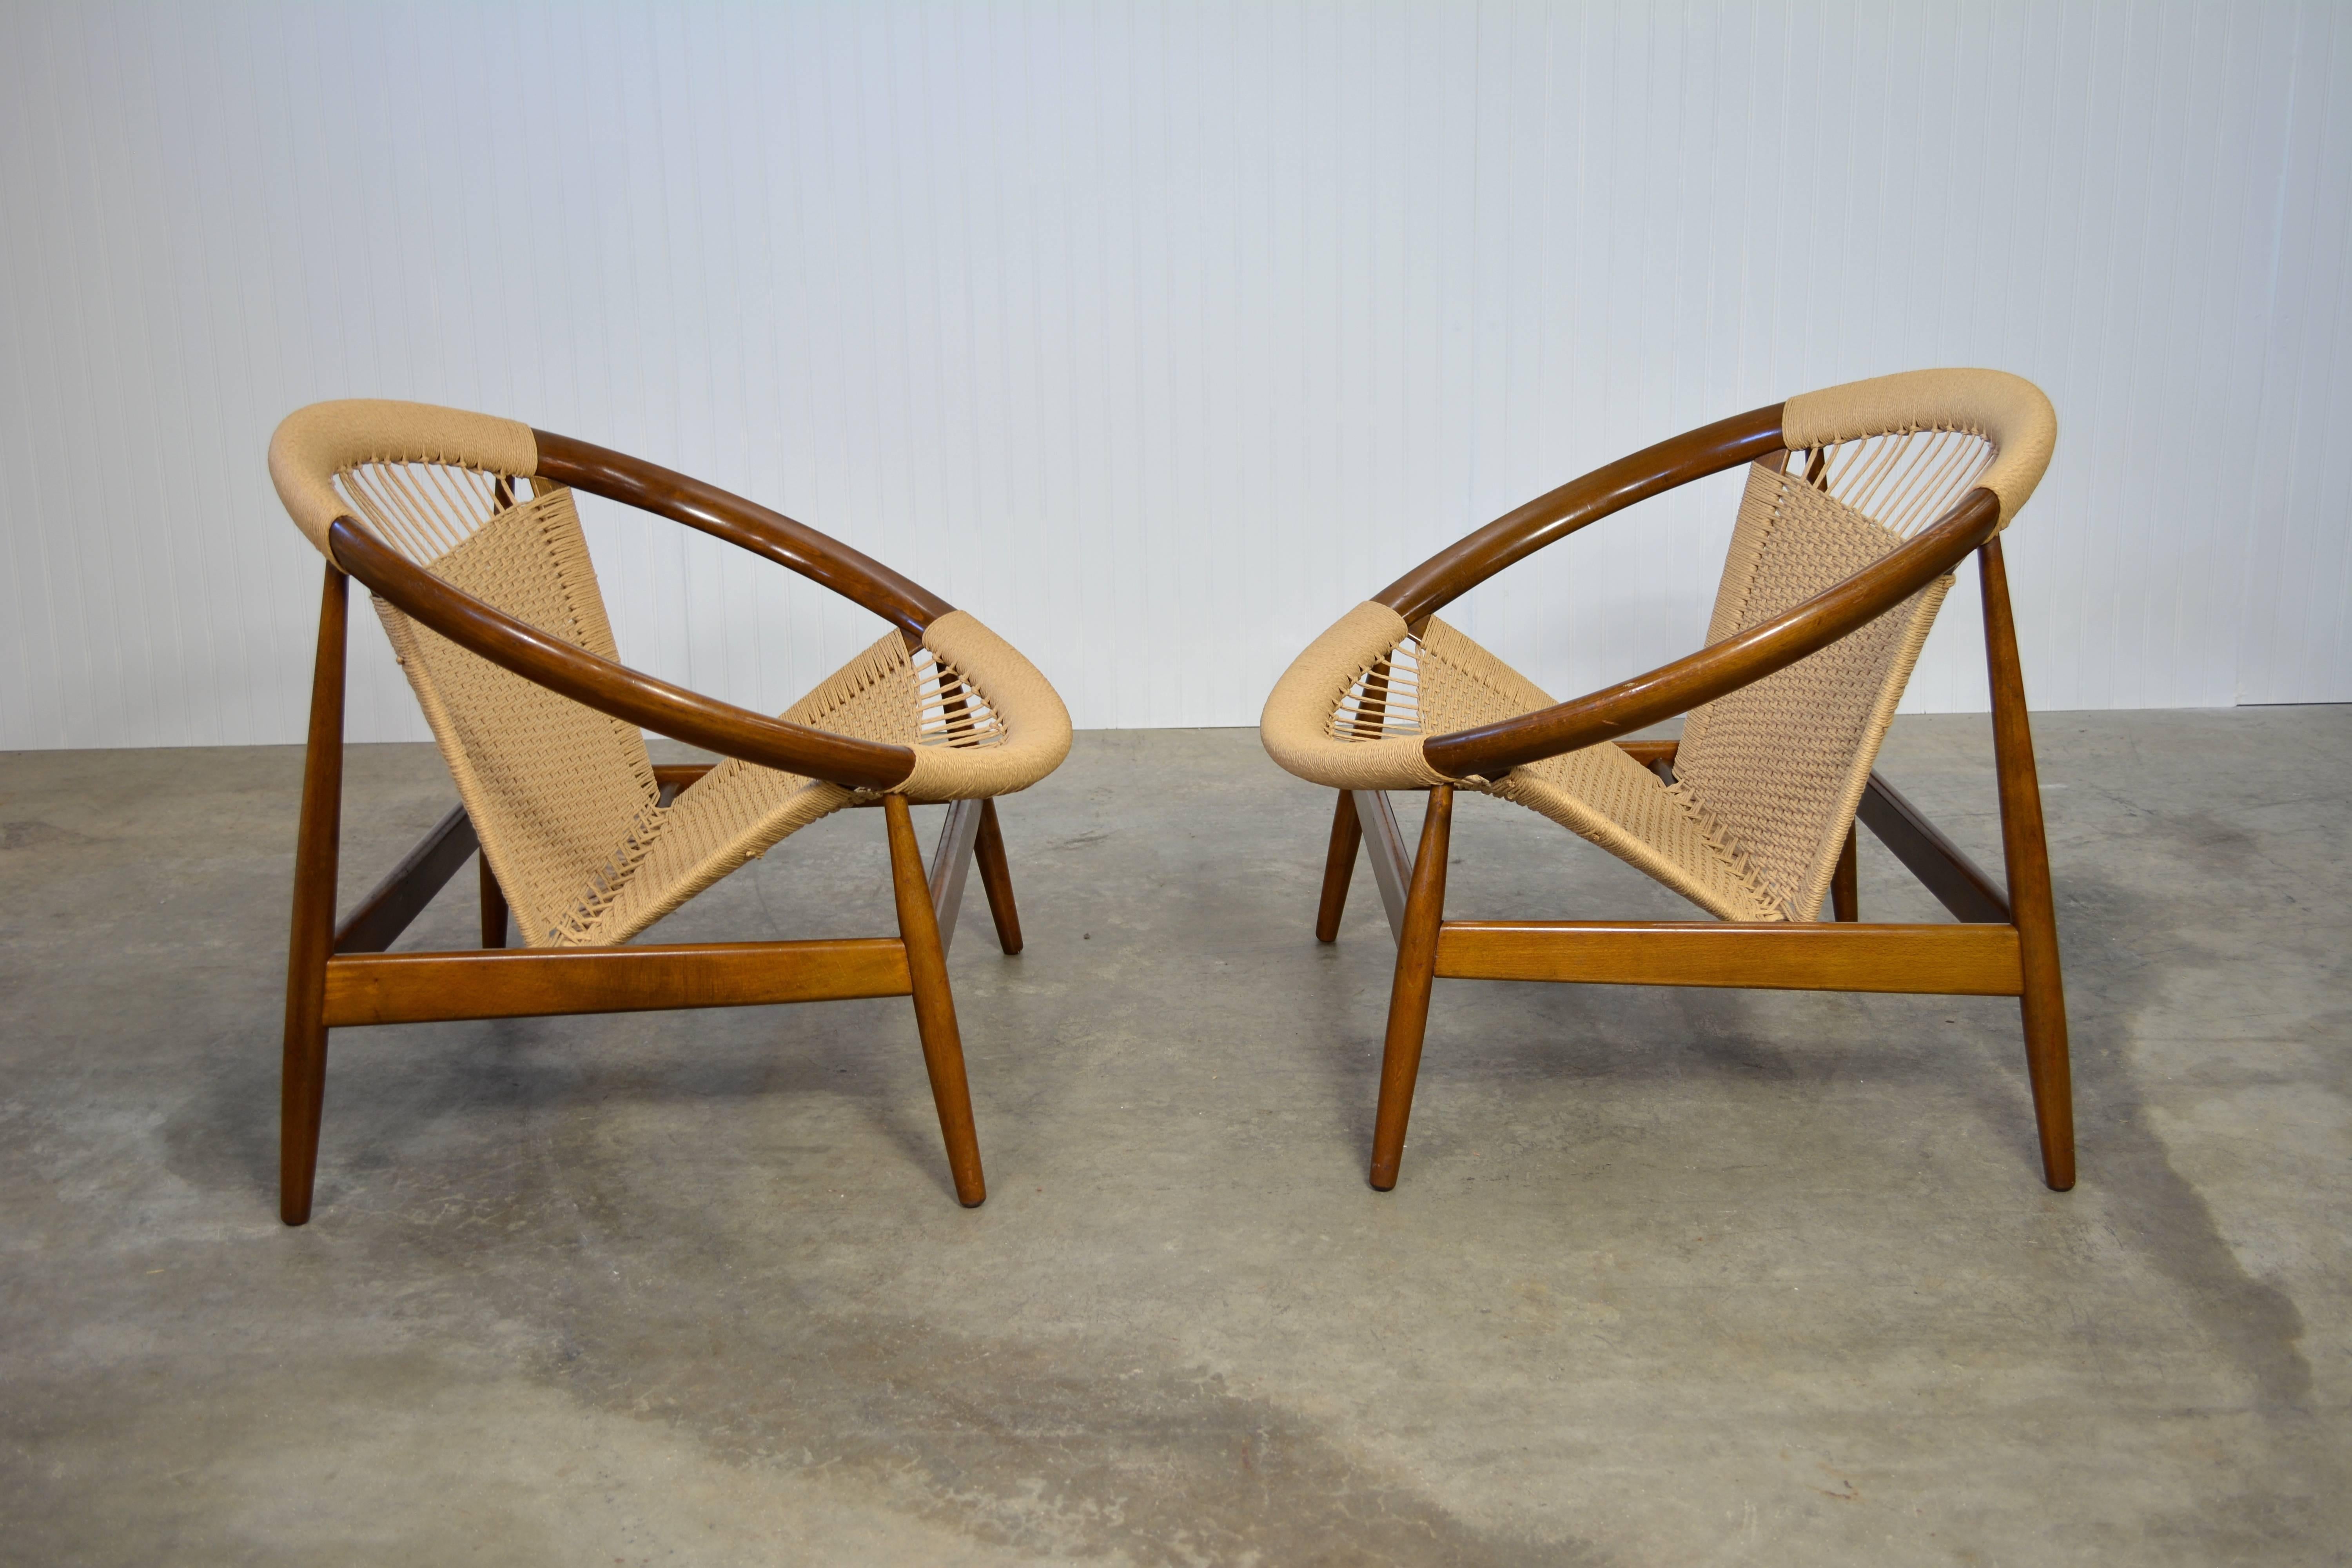 A pair of Illum Wikkelsø "Ringstol" chairs. Walnut frames and cording. Marked "made in Denmark".